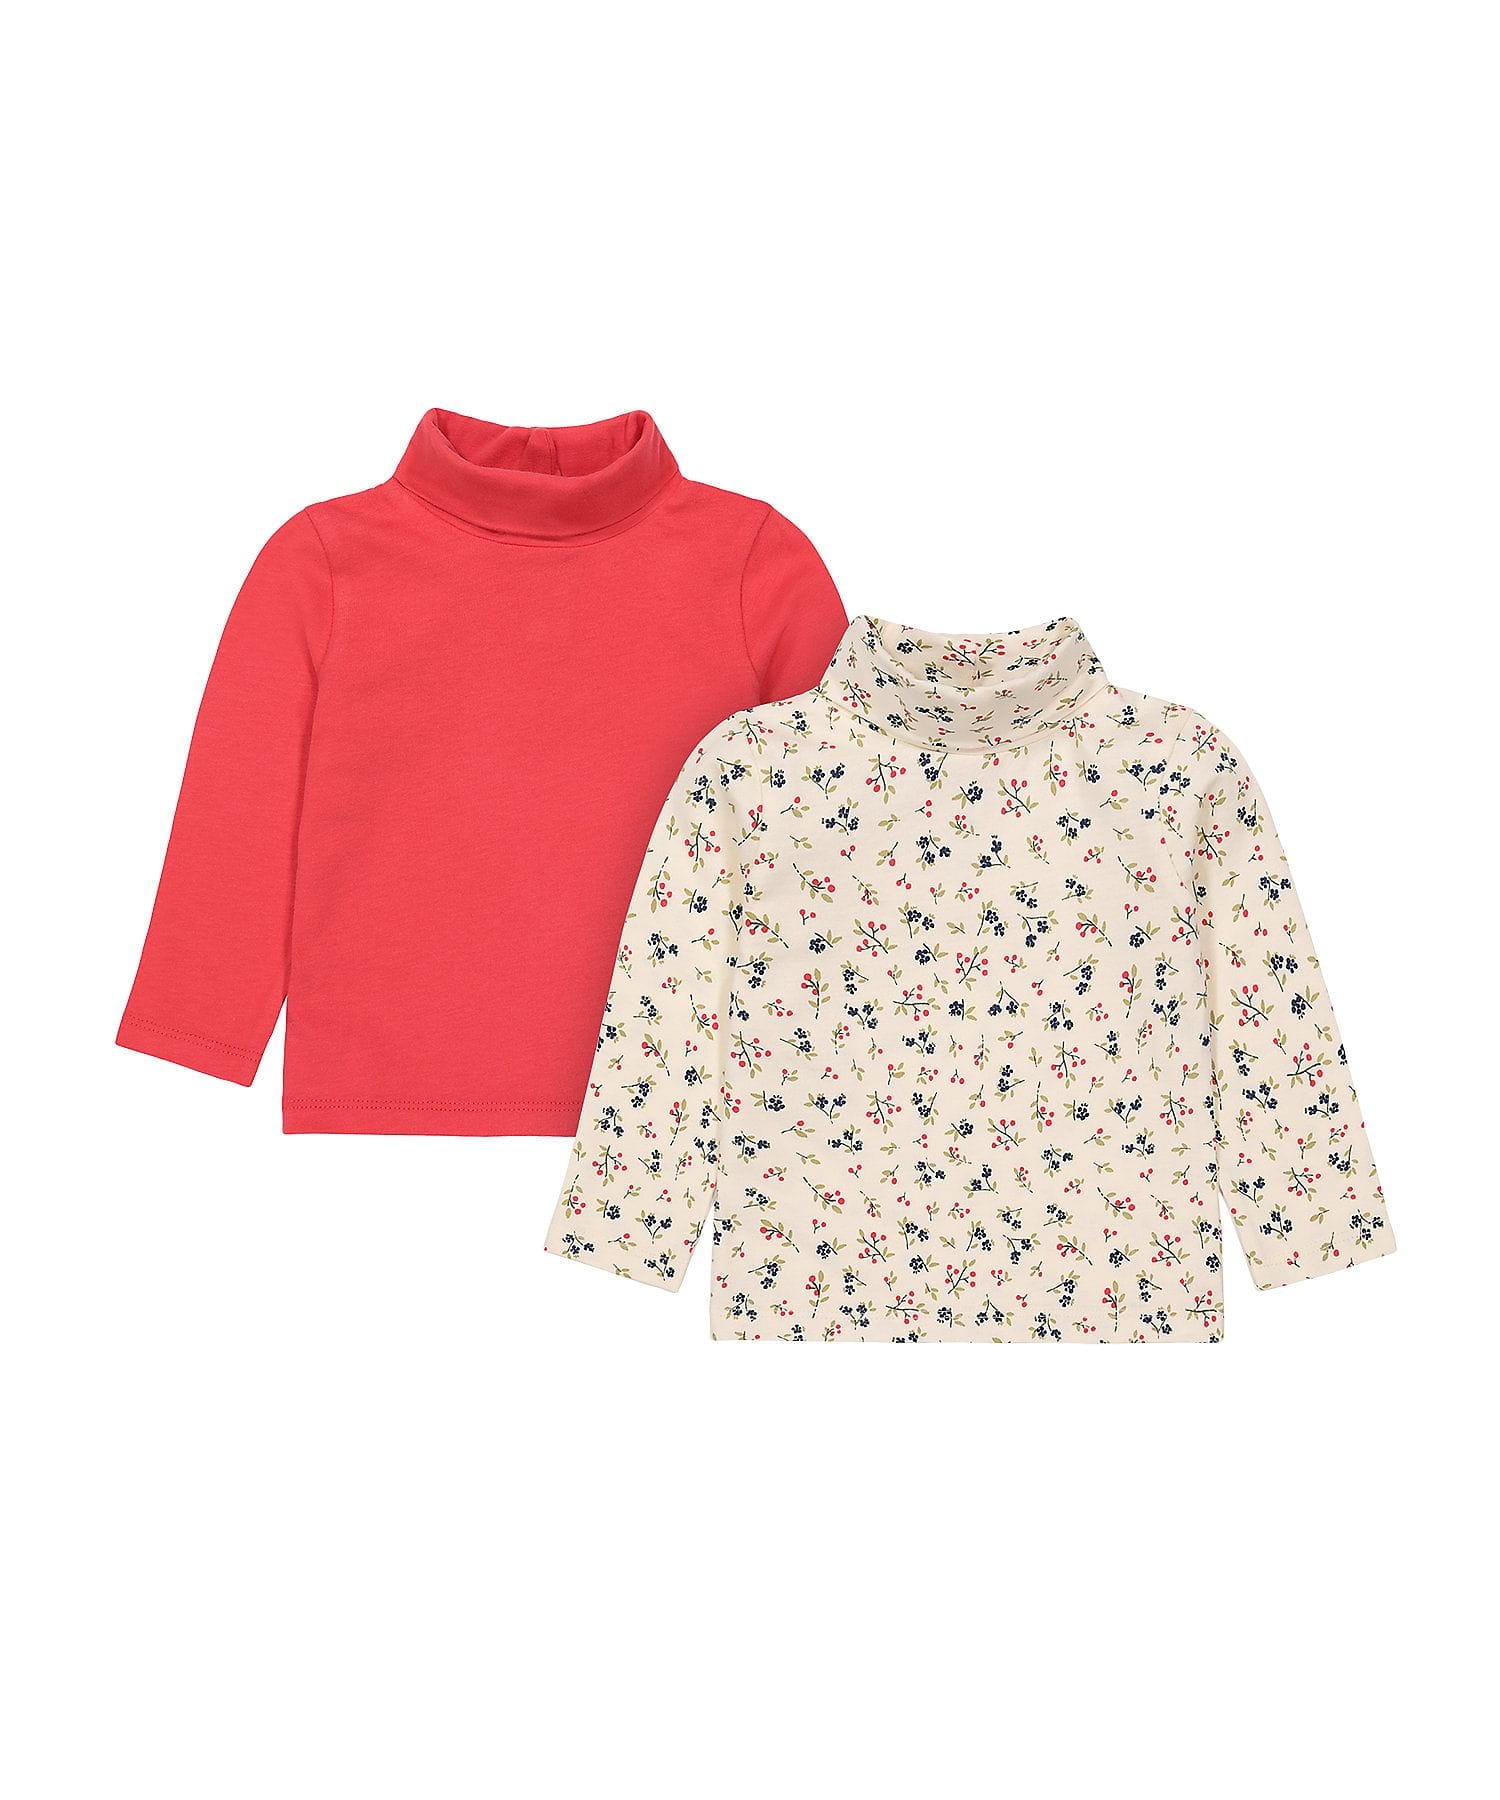 Mothercare | Girls Full Sleeves Rollneck Top Printed - Pack Of 2 - Multicolor 0